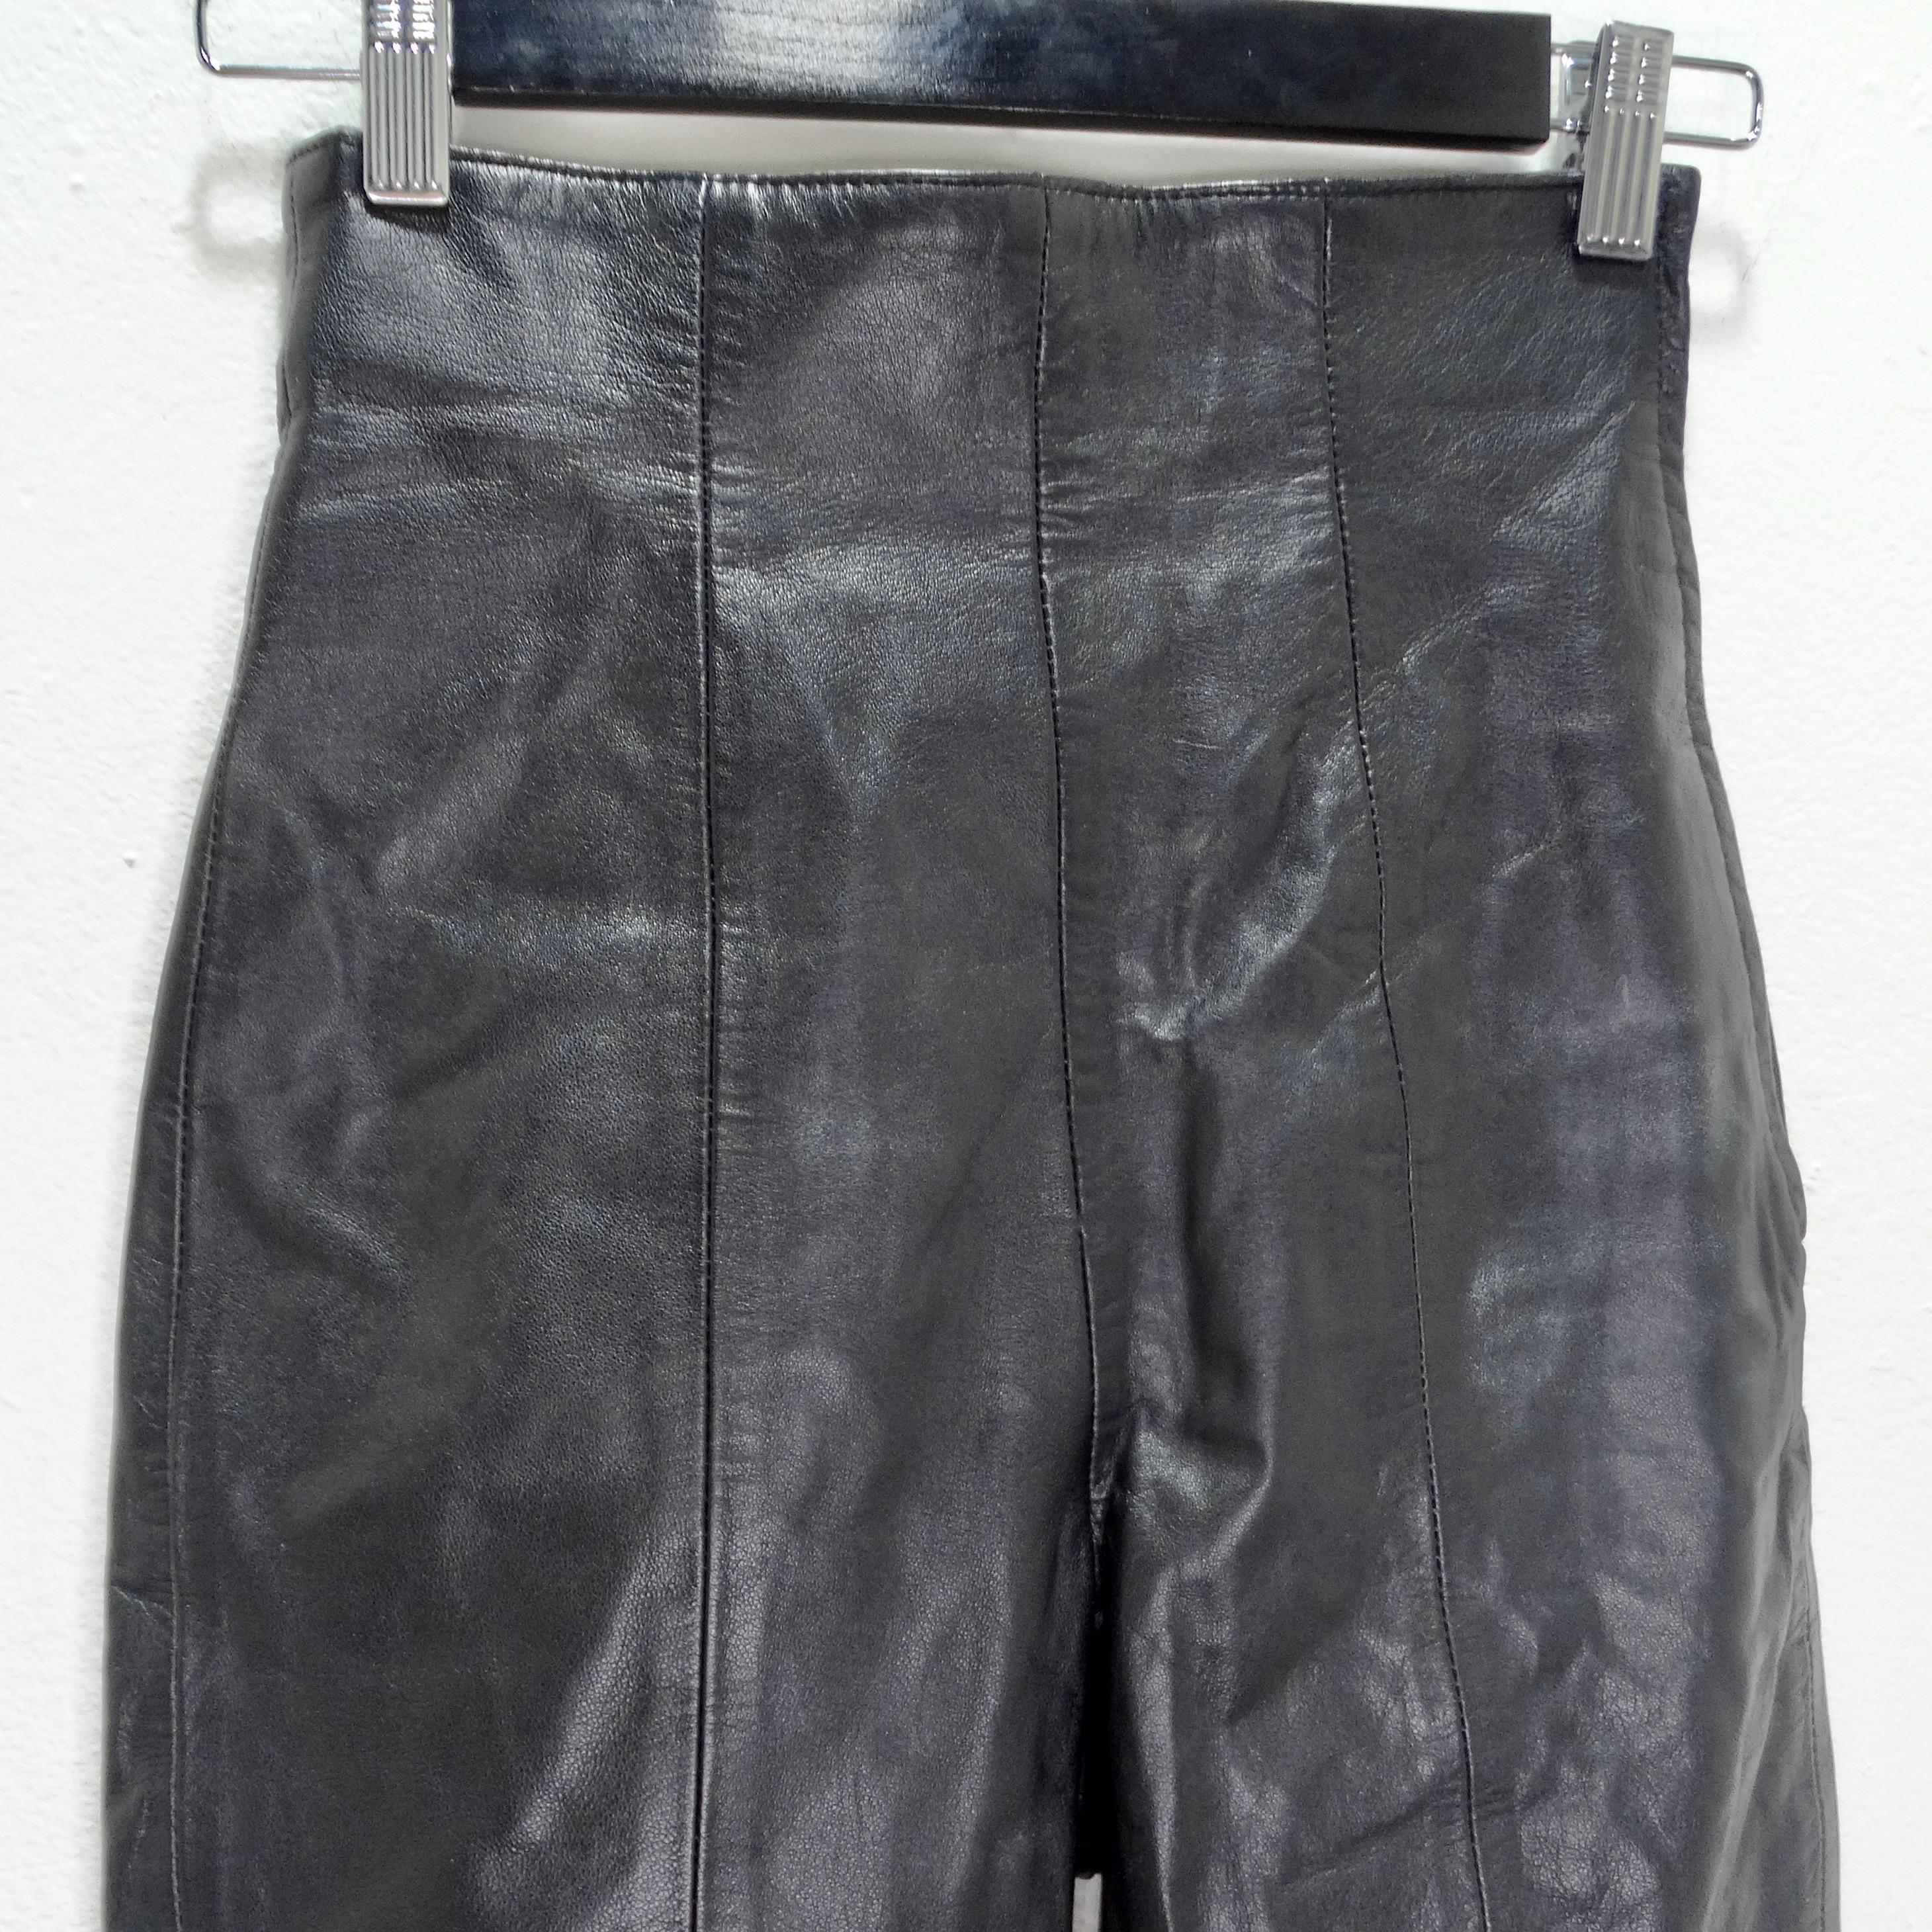 The Michael Hoban 1980s Black Leather Biker Shorts are a bold and versatile fashion statement that seamlessly marries timeless elegance with an edgy and rebellious spirit. Crafted with meticulous attention to detail, these mid-length leather shorts